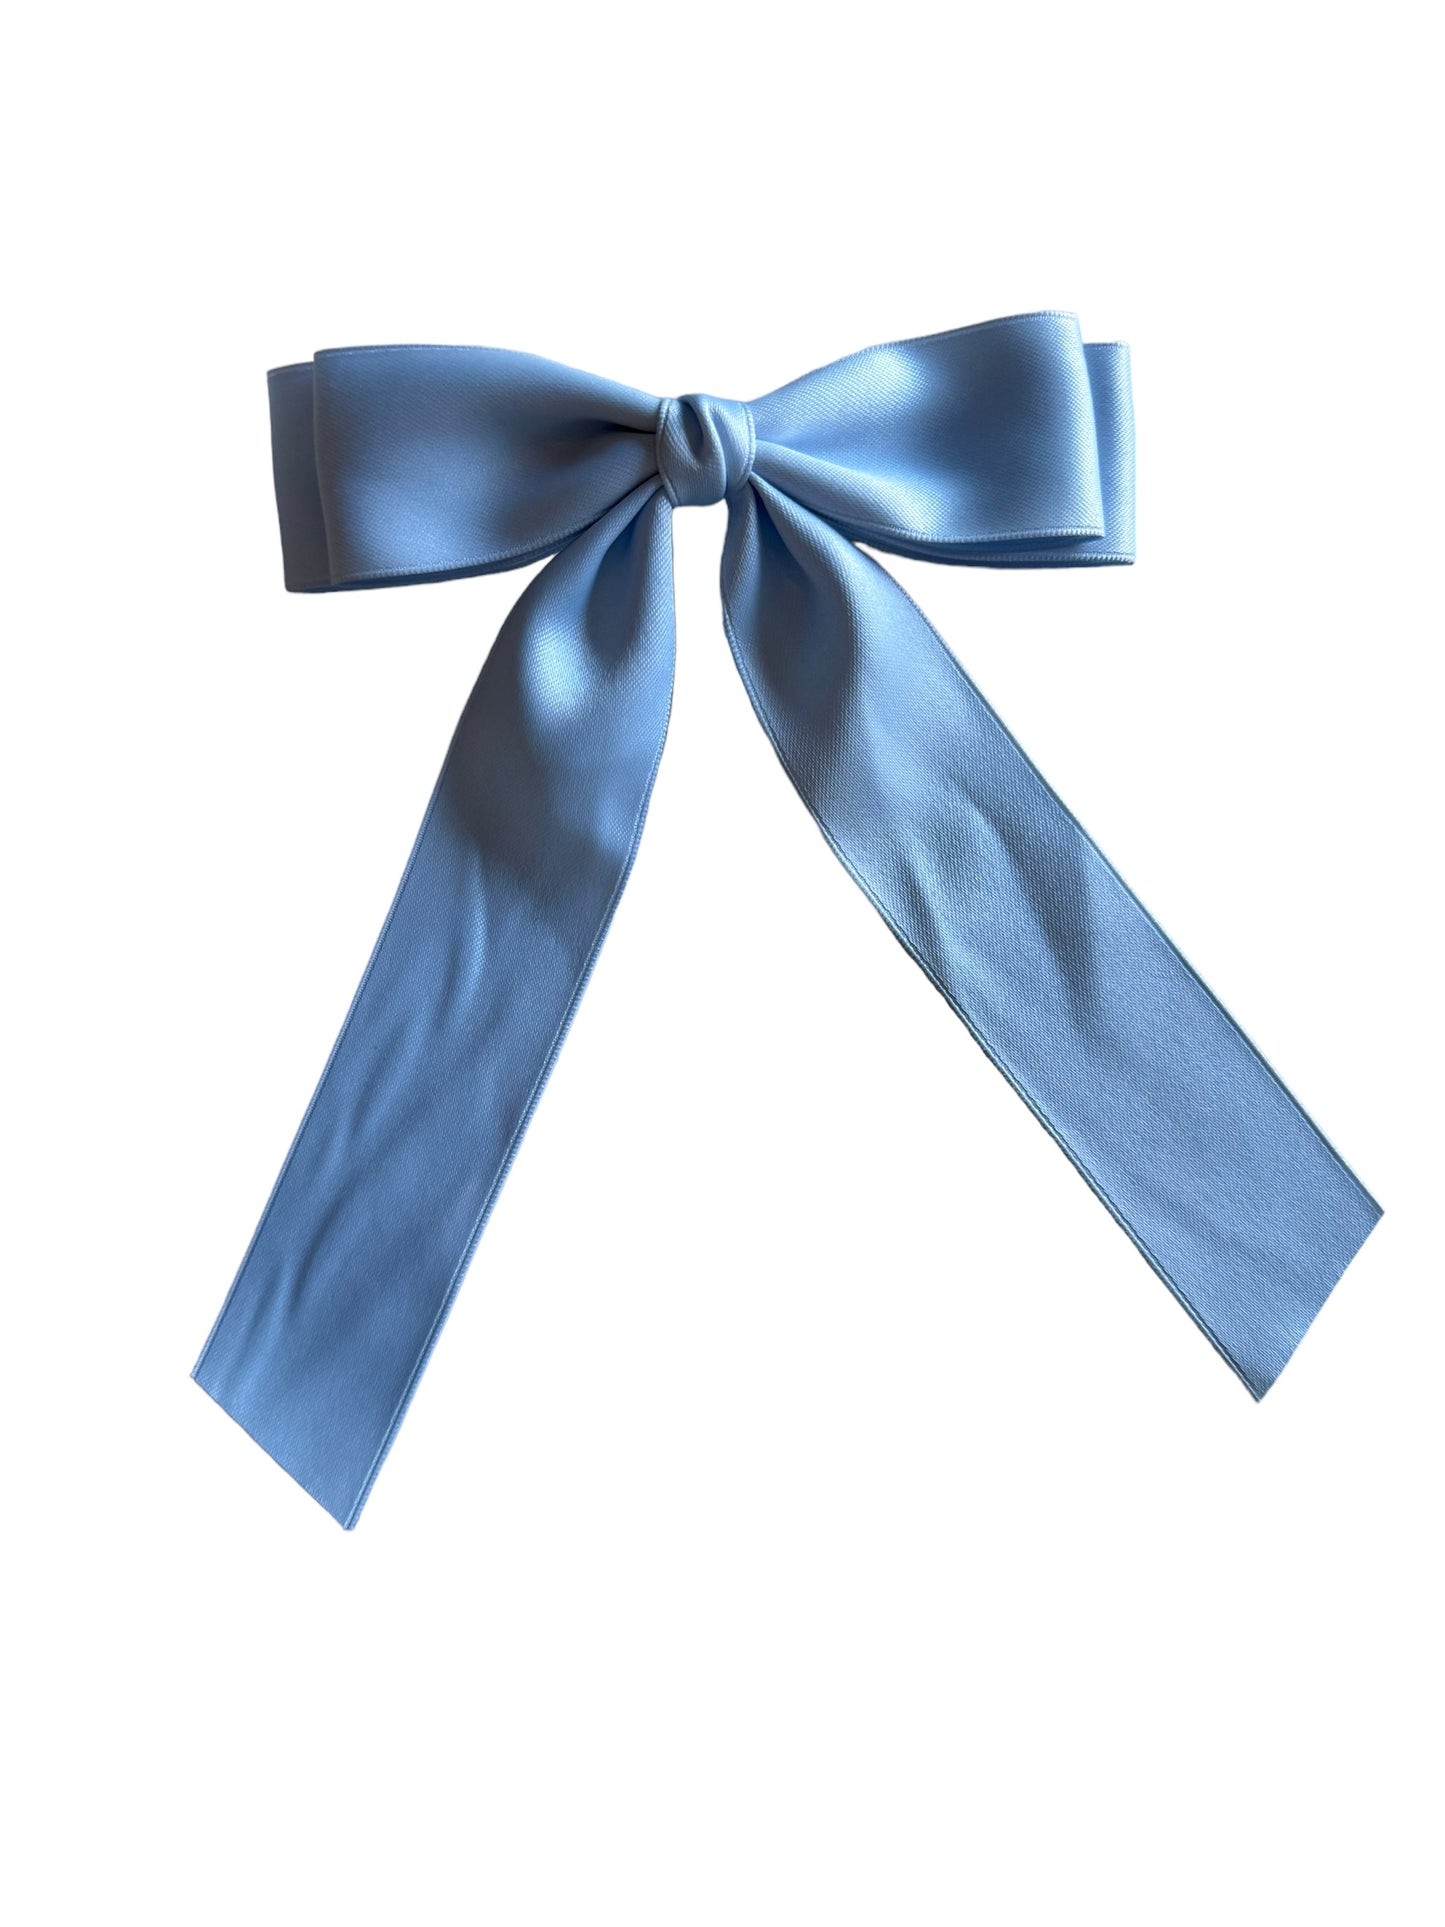 Satin Bow with Single Tail